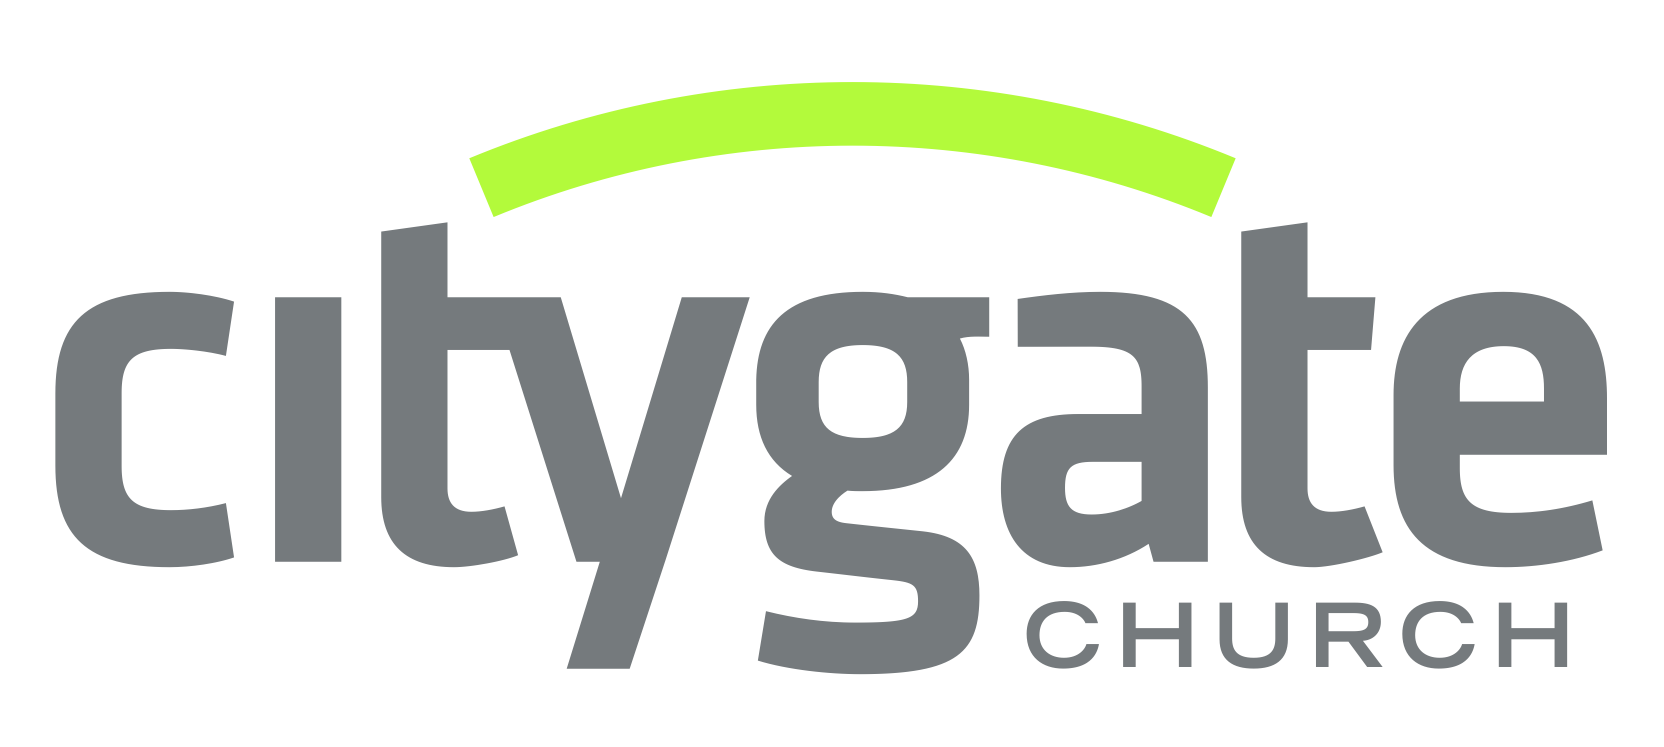 CityGate_Logo_Final-ID-e7a591f7-ec75-41c3-c78b-c0eac4facb59.png